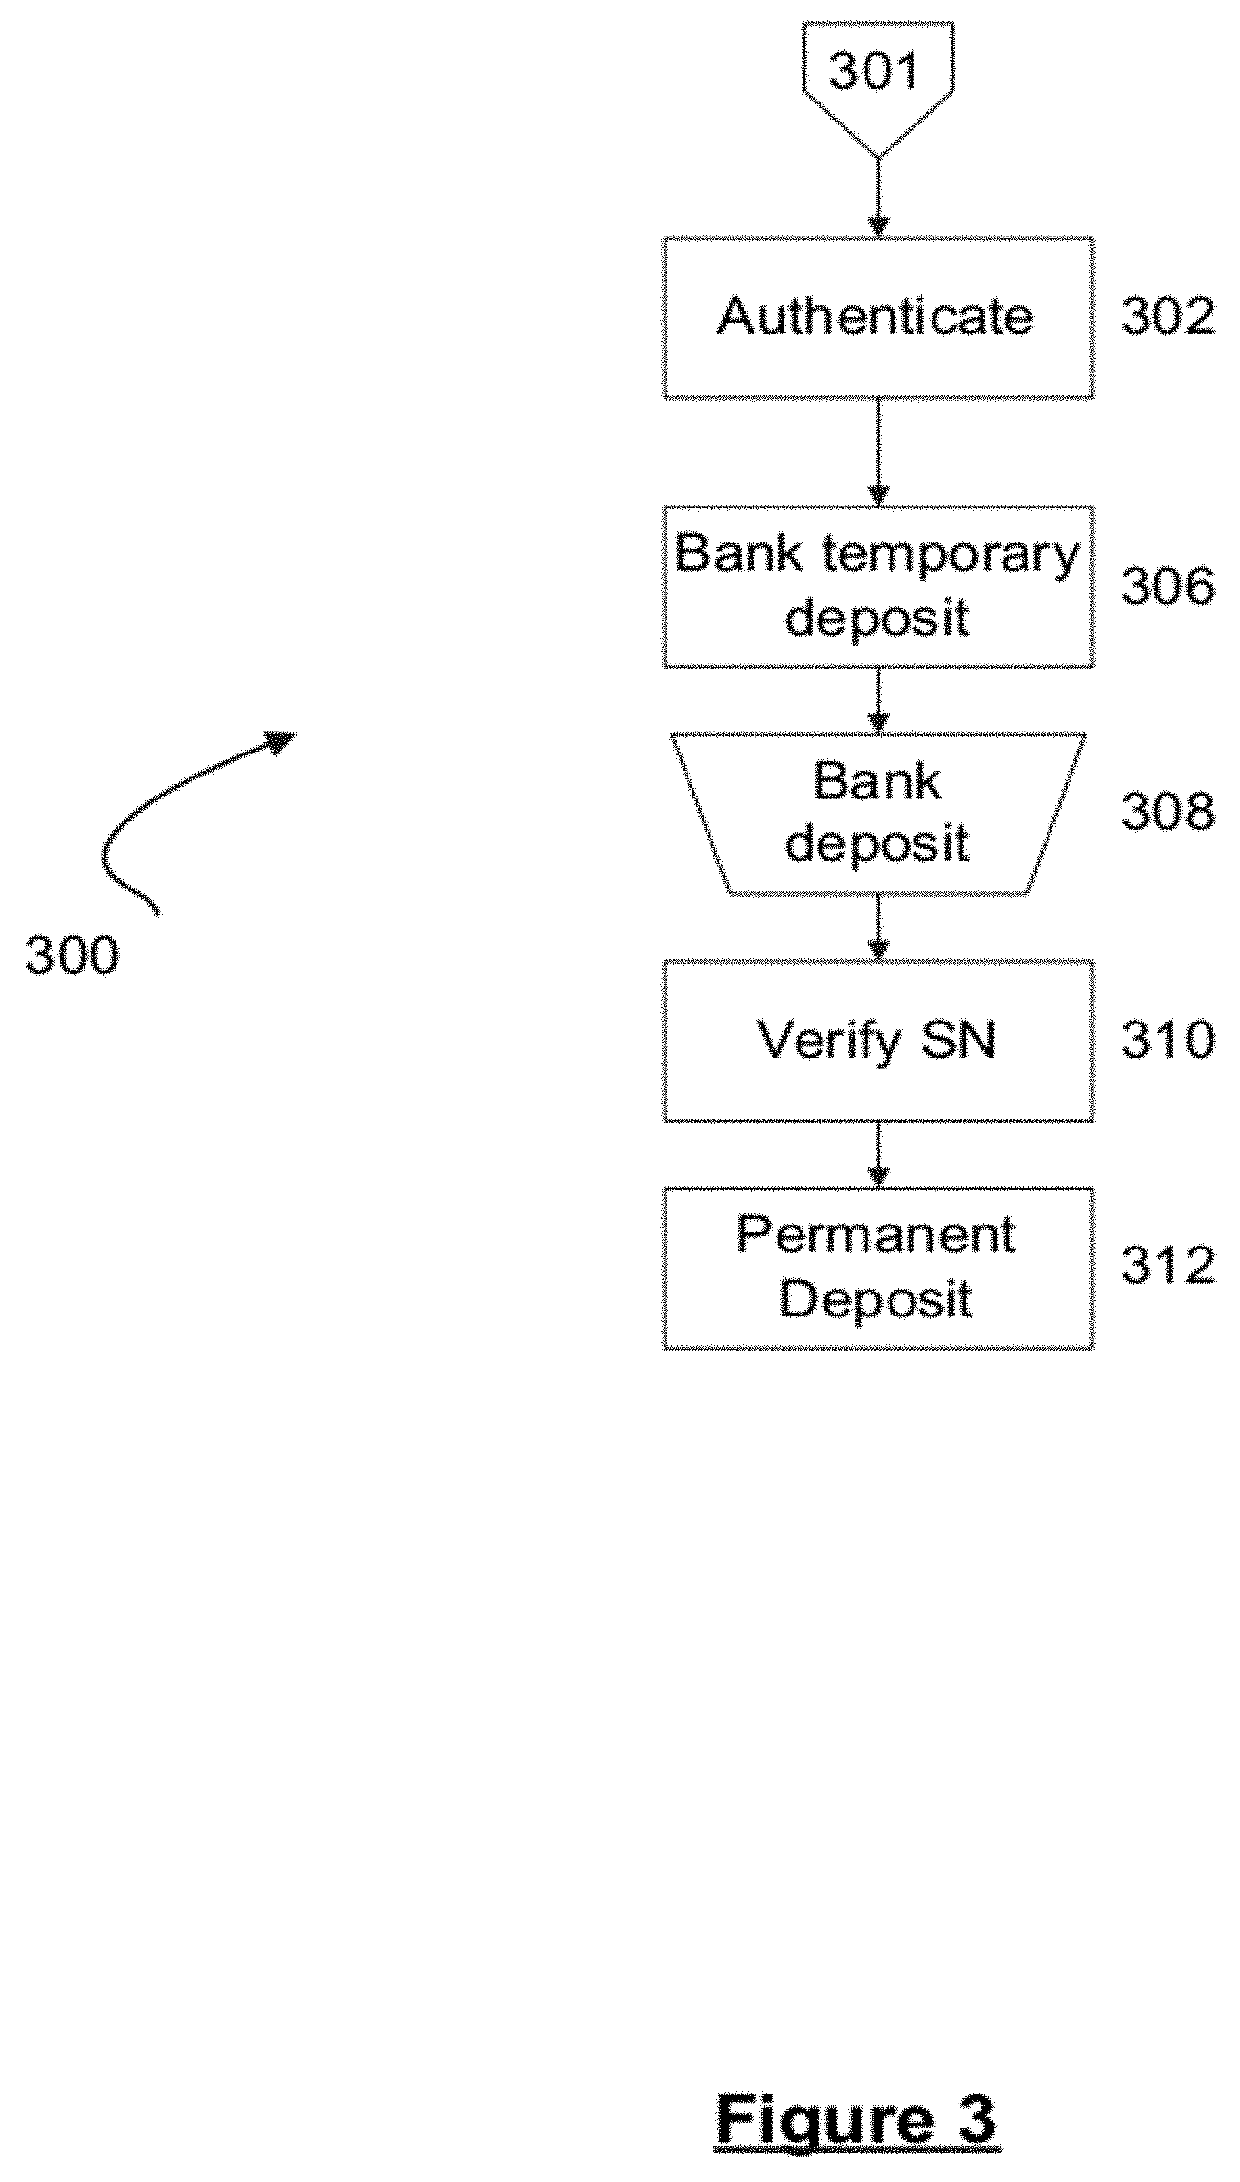 System and process for automatically analyzing currency objects